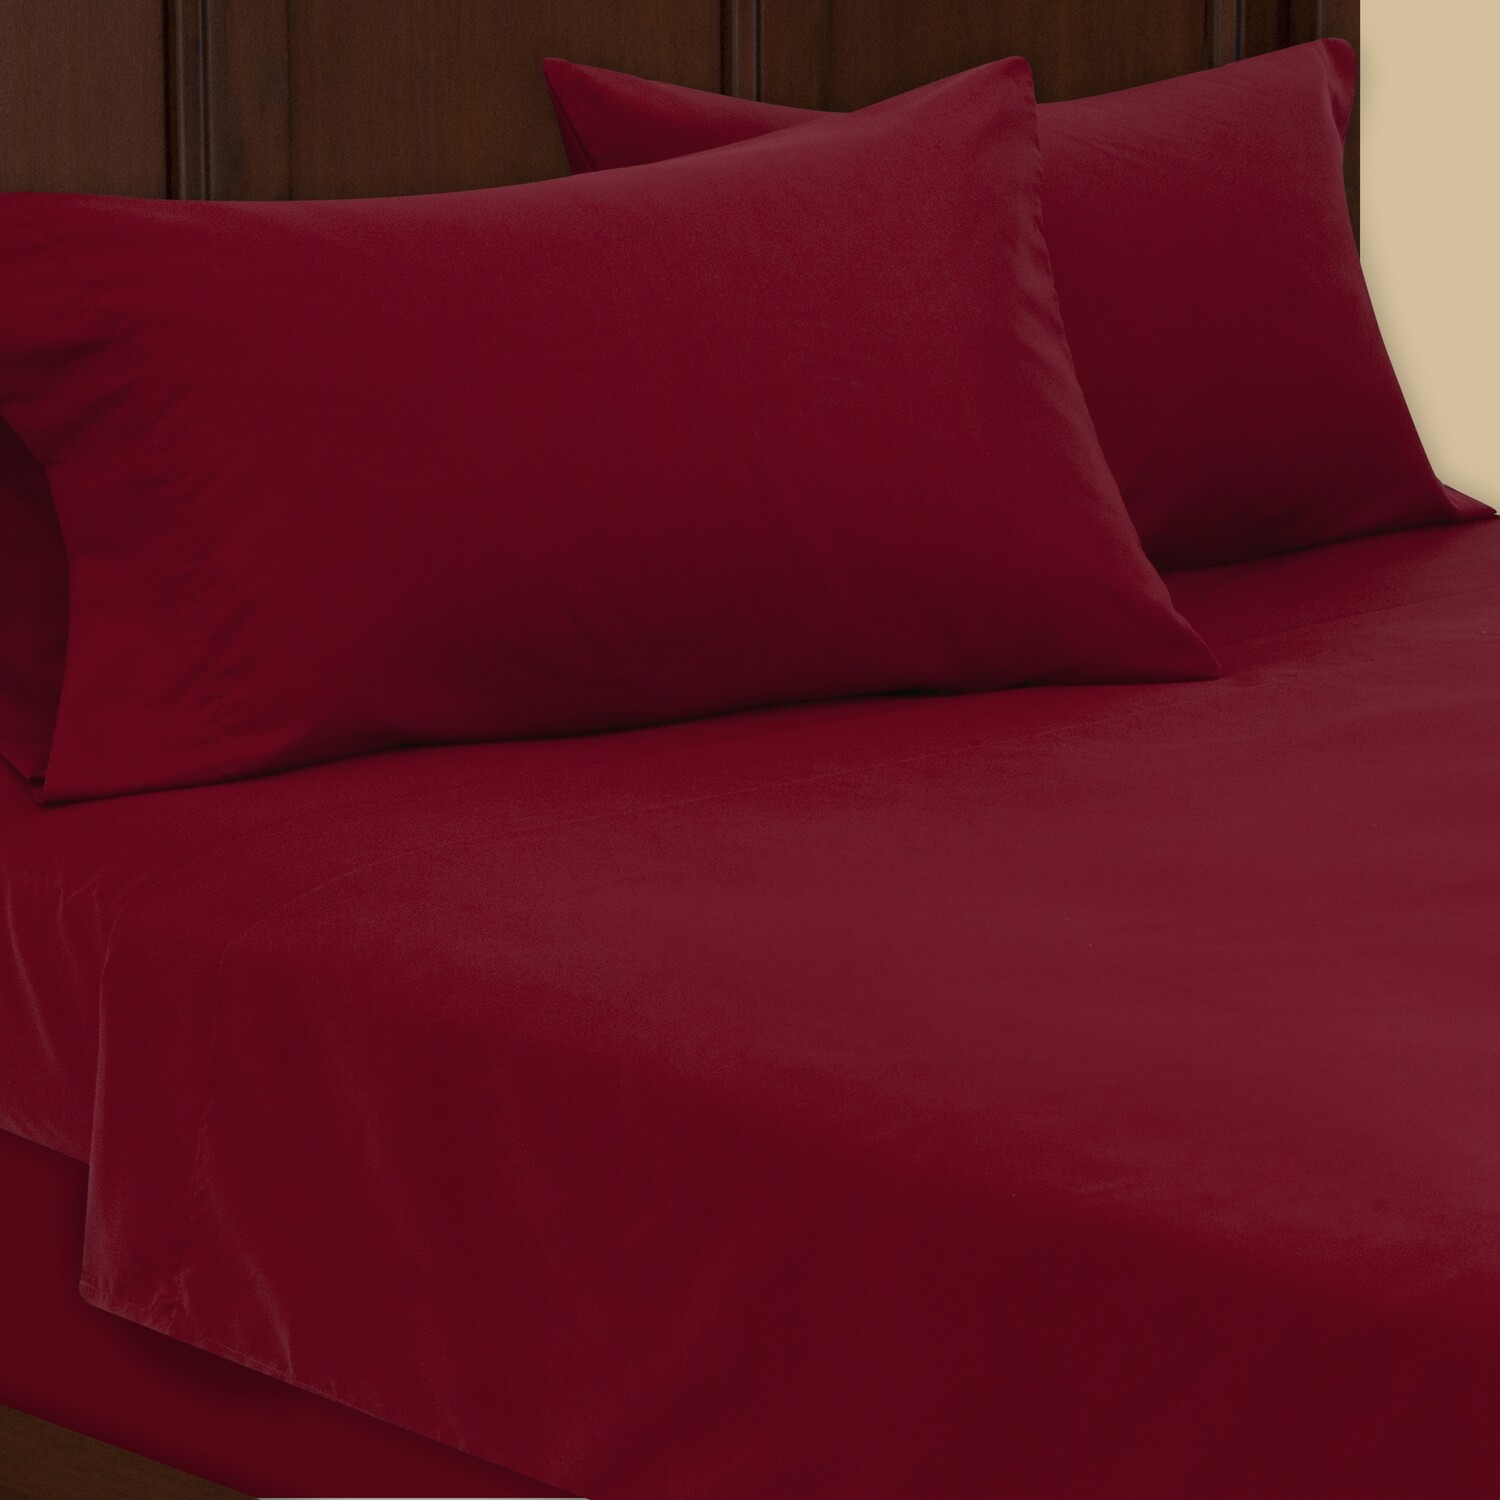 Microfiber Bedding Sheet Set by Mainstays - Red